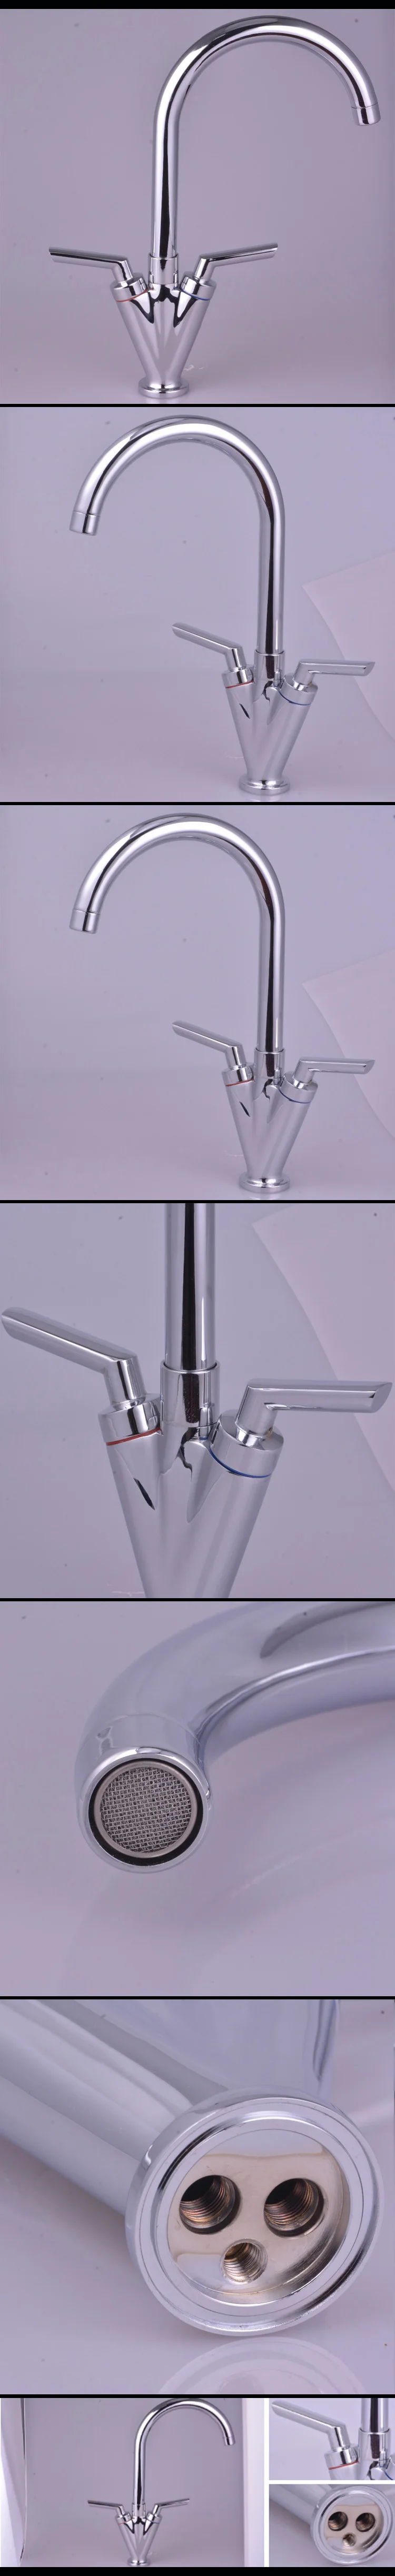 High quality 360 rotate hot and cold chrome dual handle brass kitchen faucets